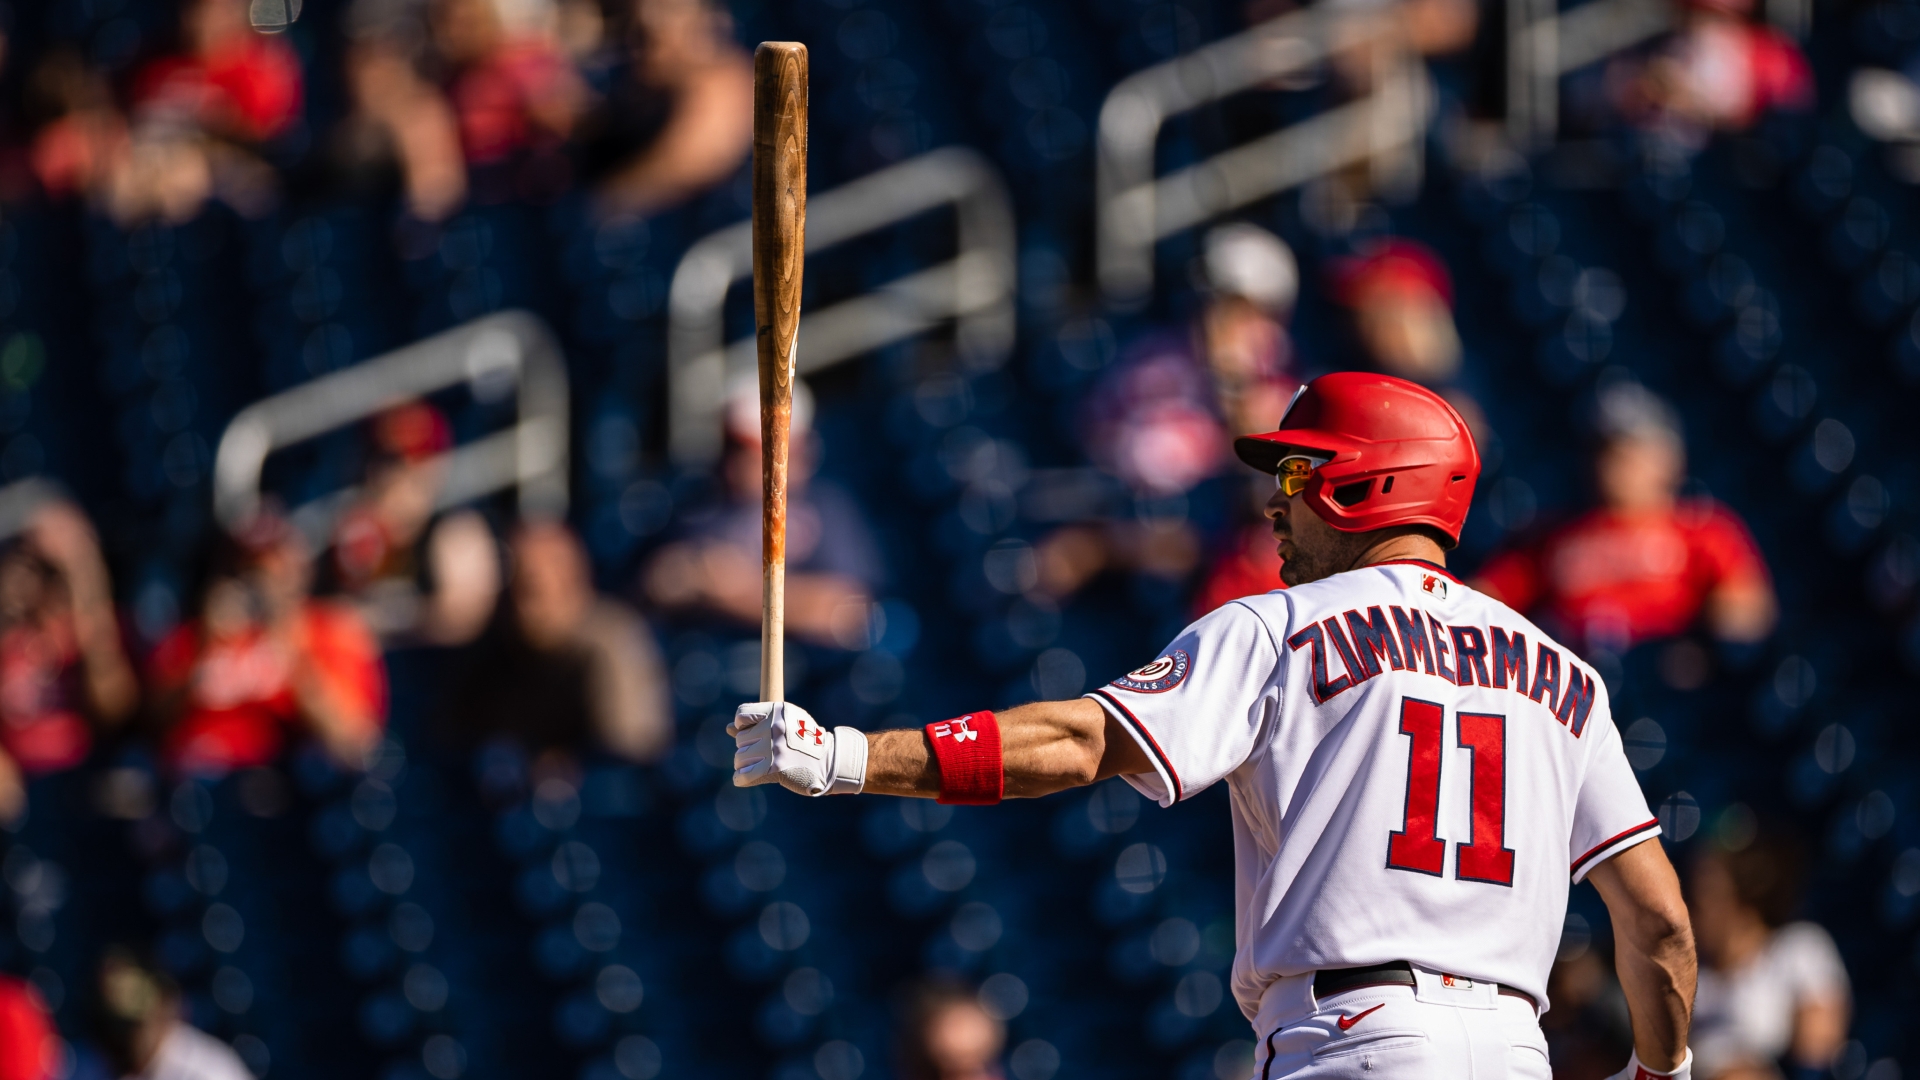 Ryan Zimmerman says physical toll was biggest factor in retirement decision  - WTOP News